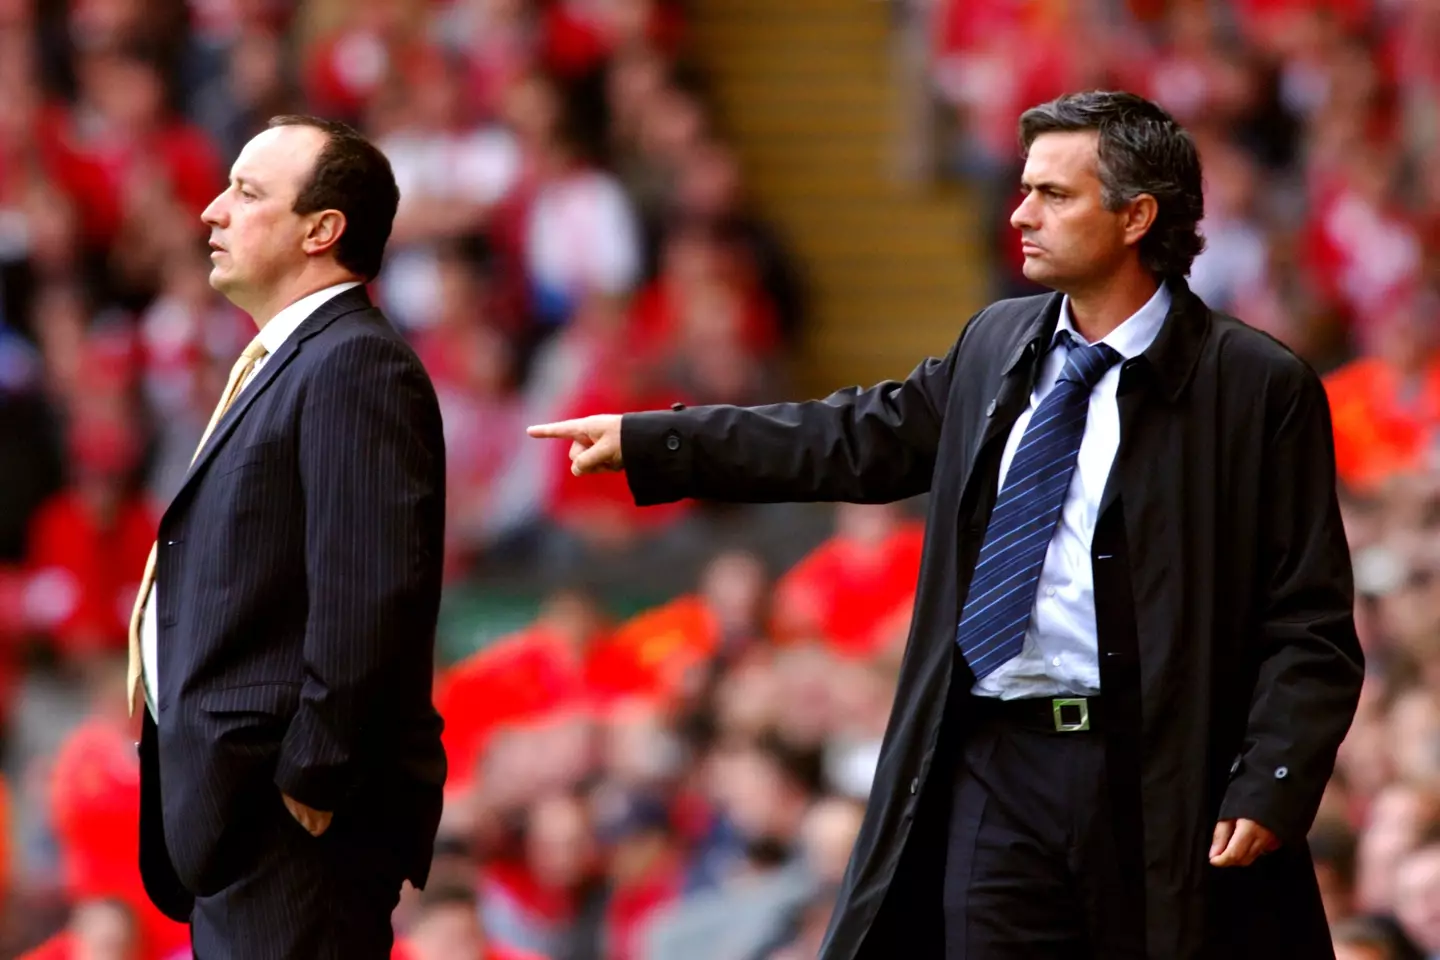 Mourinho and Benitez were the catalysts for the rivalry. Image: Alamy